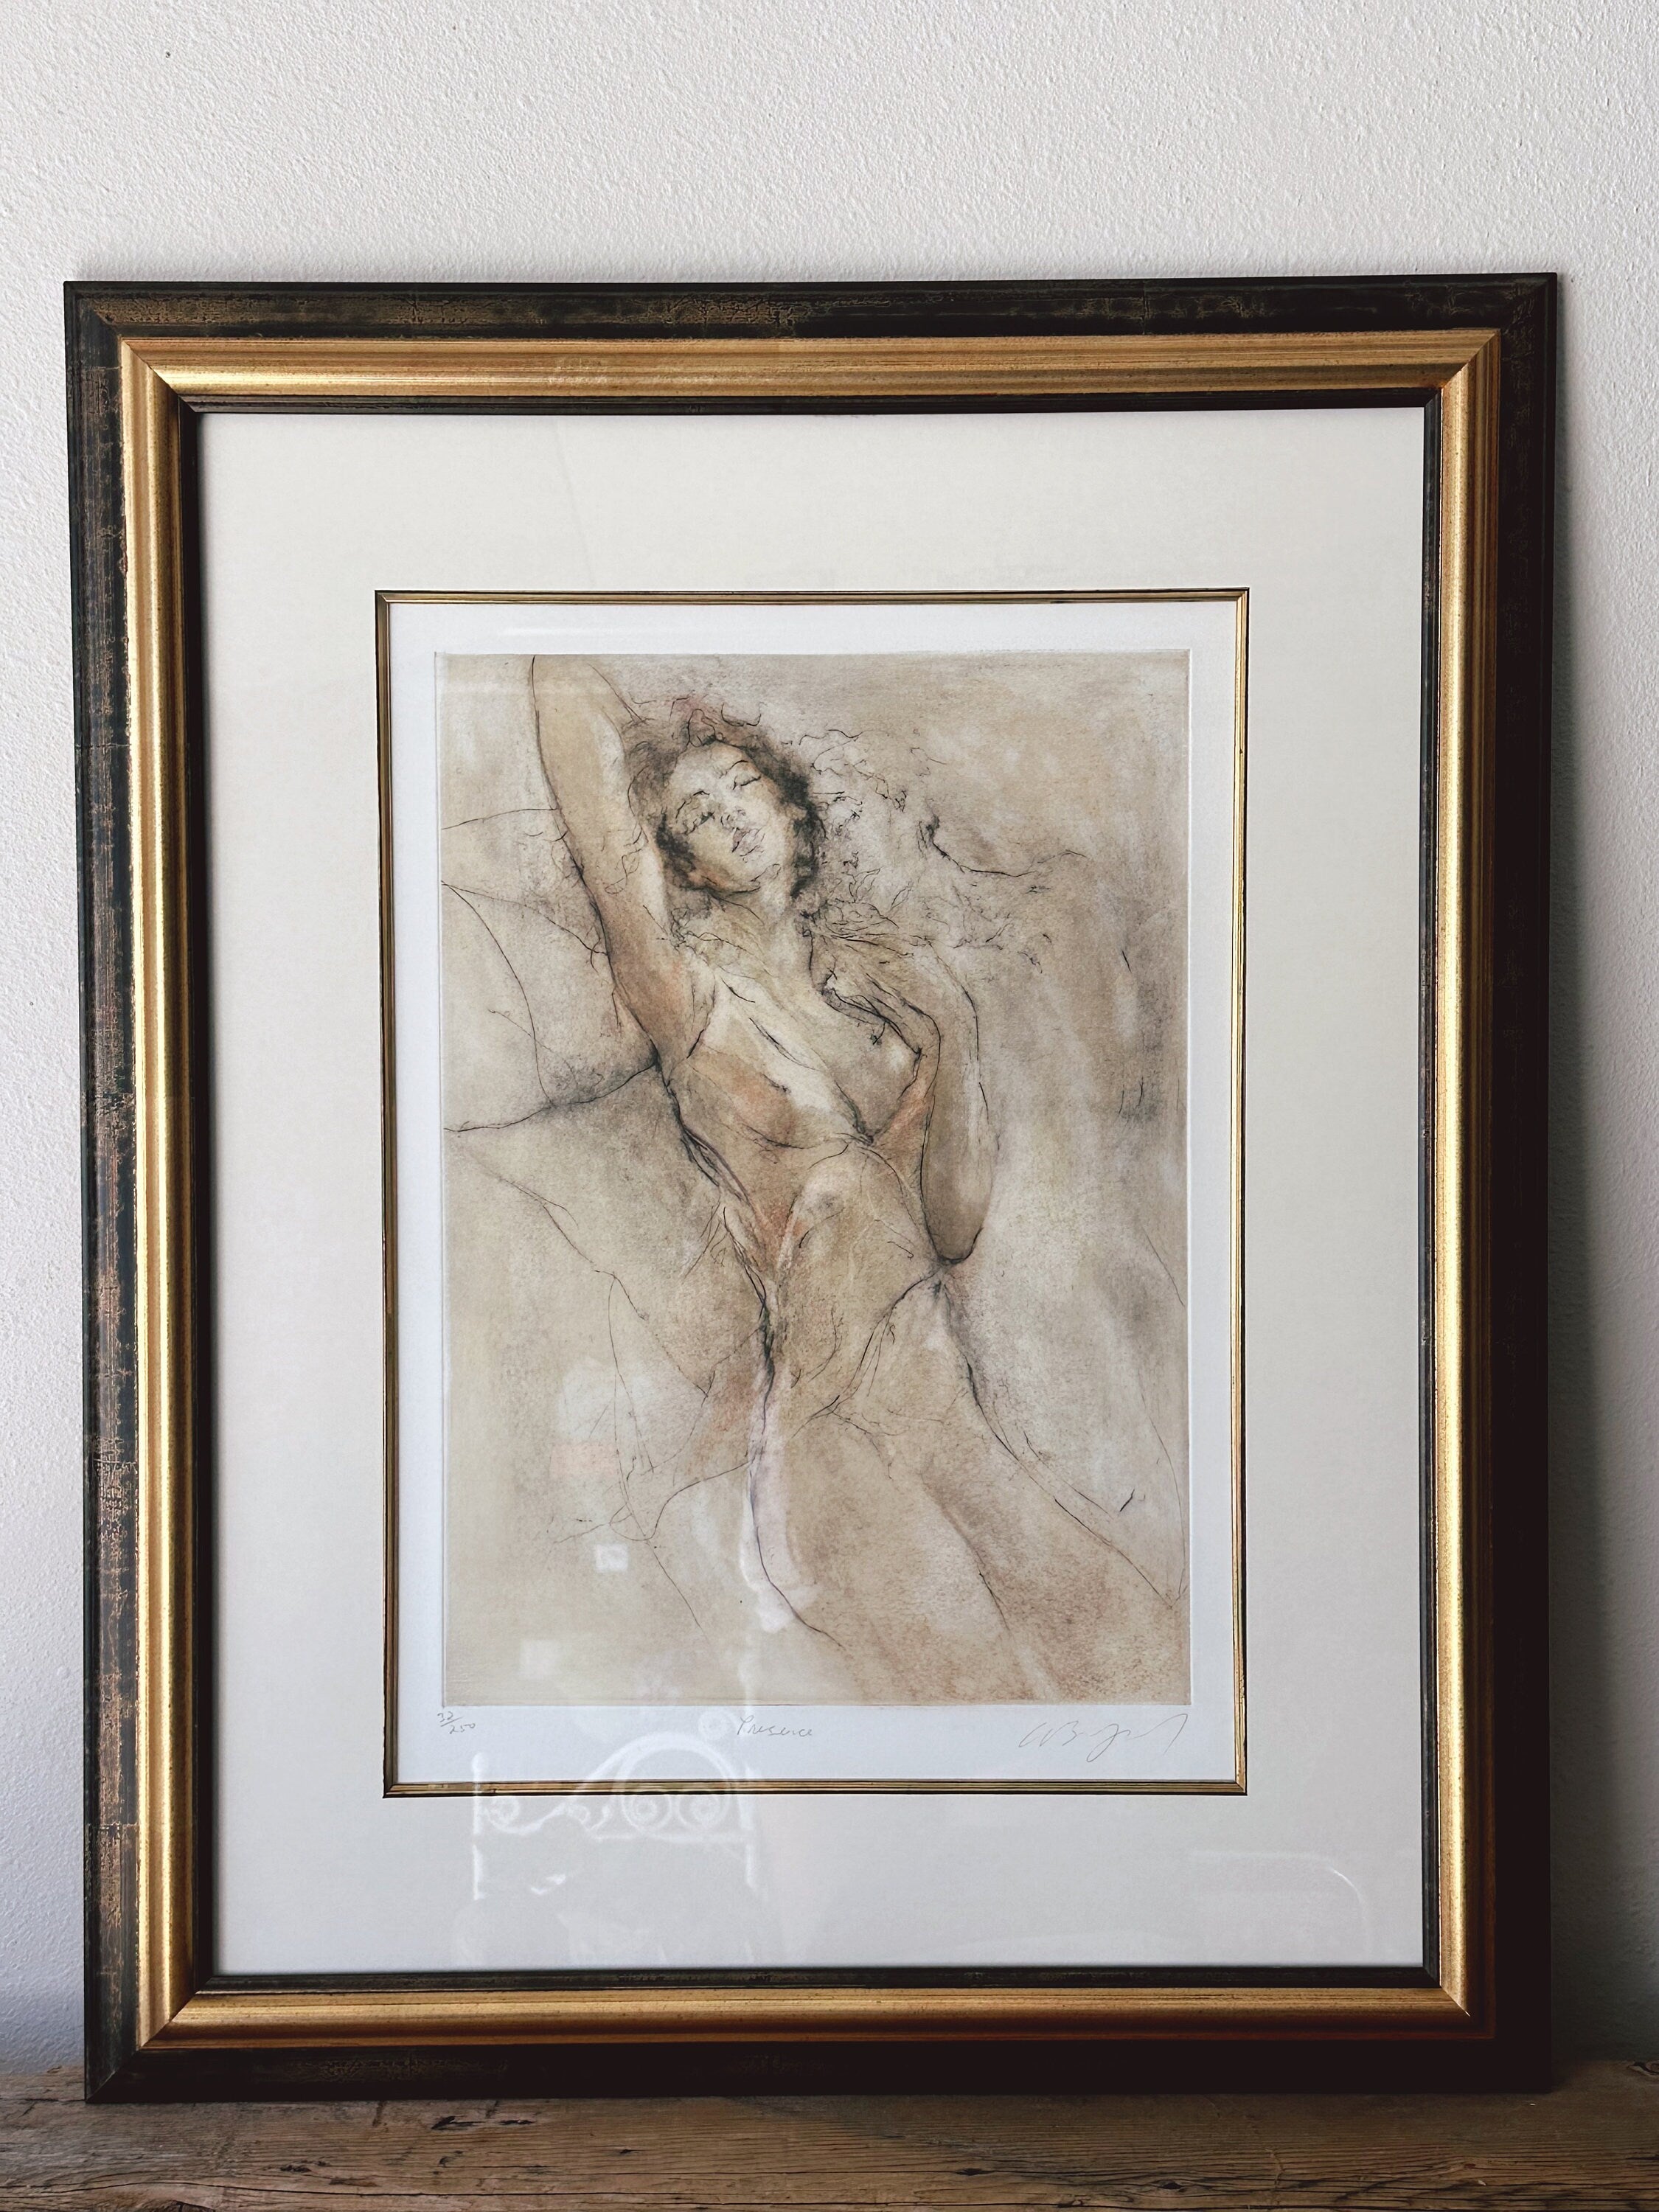 Framed Vintage Female Nude Art Print "Presence" Signed and Numbered | Elegant Naked Woman Watercolor Print Gallery Wall Home Decor